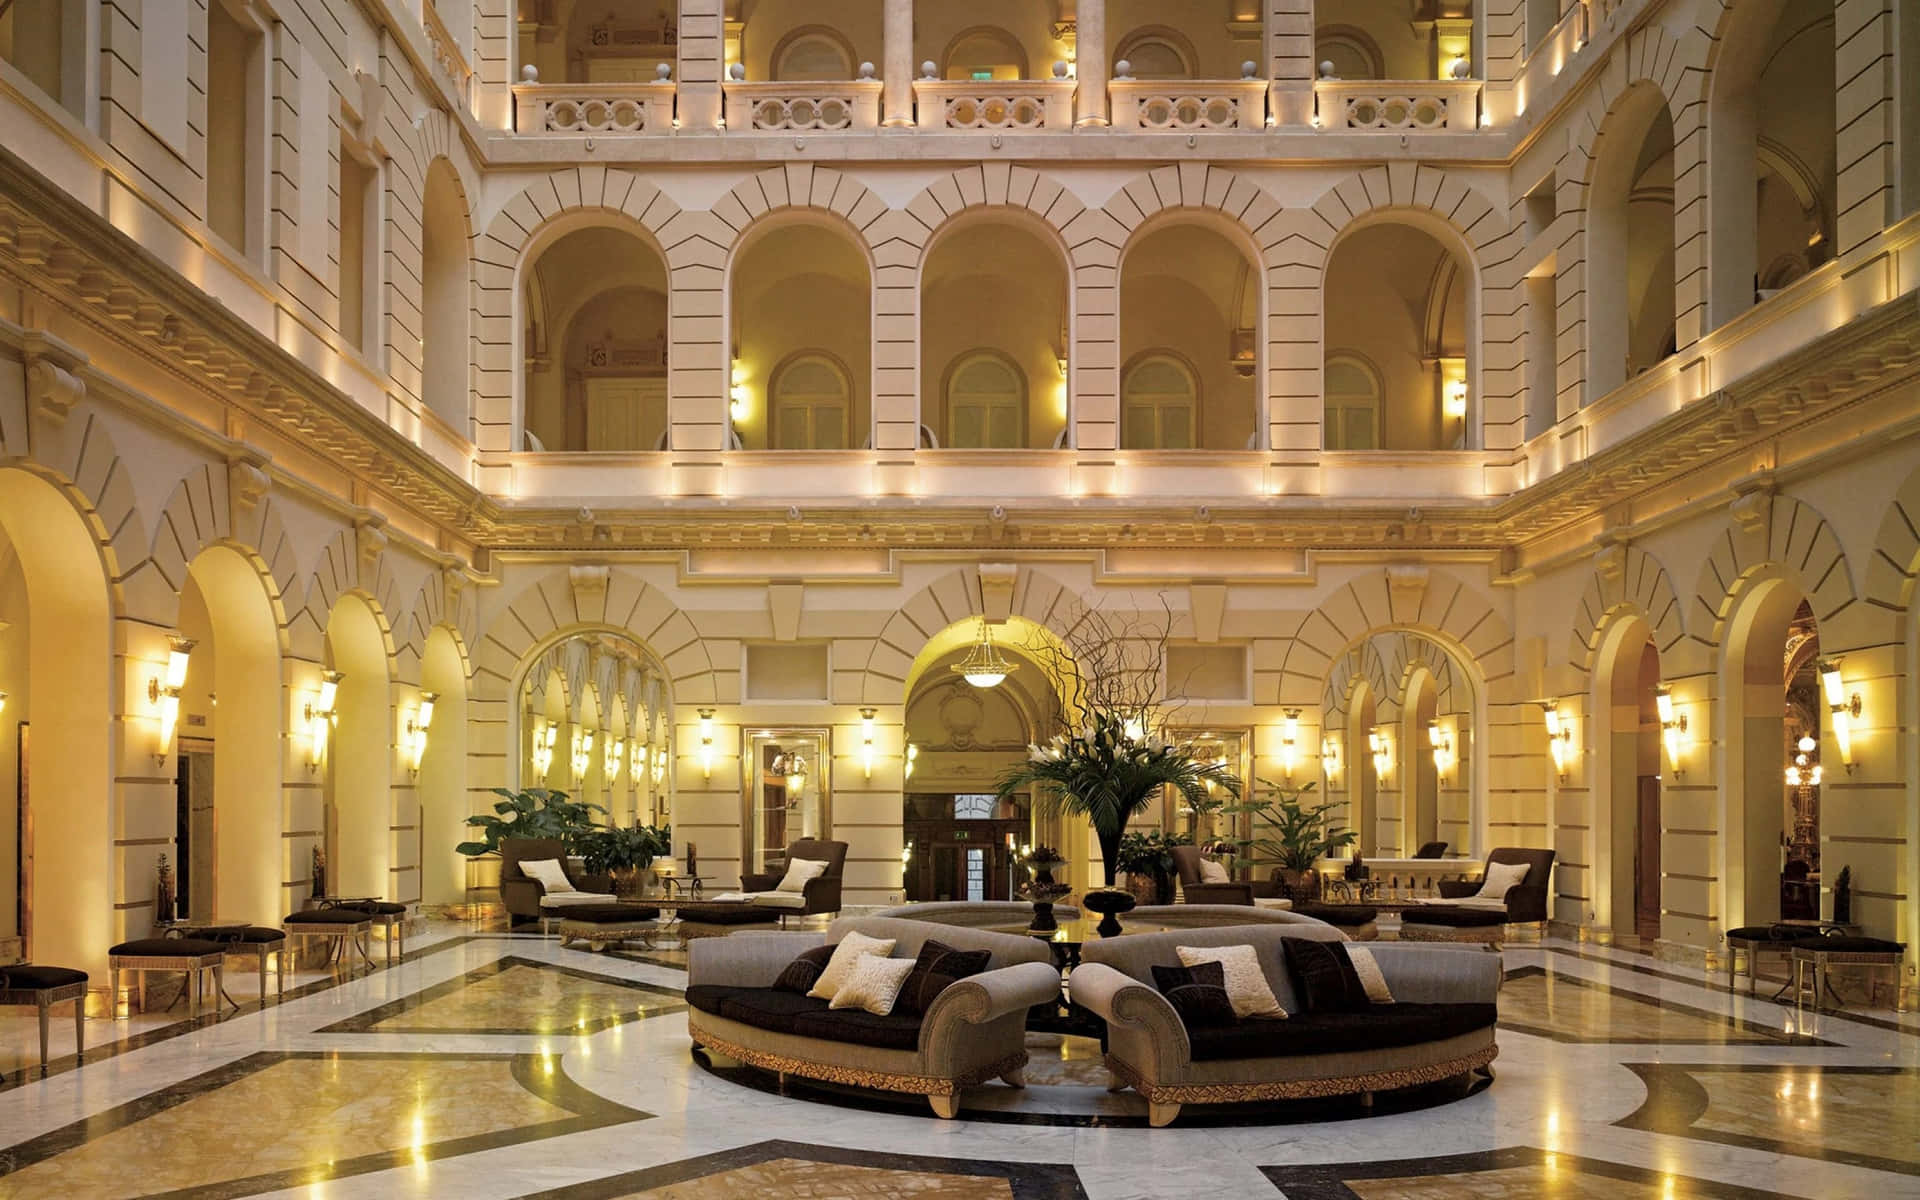 Relax in high-end luxury in this five-star hotel.